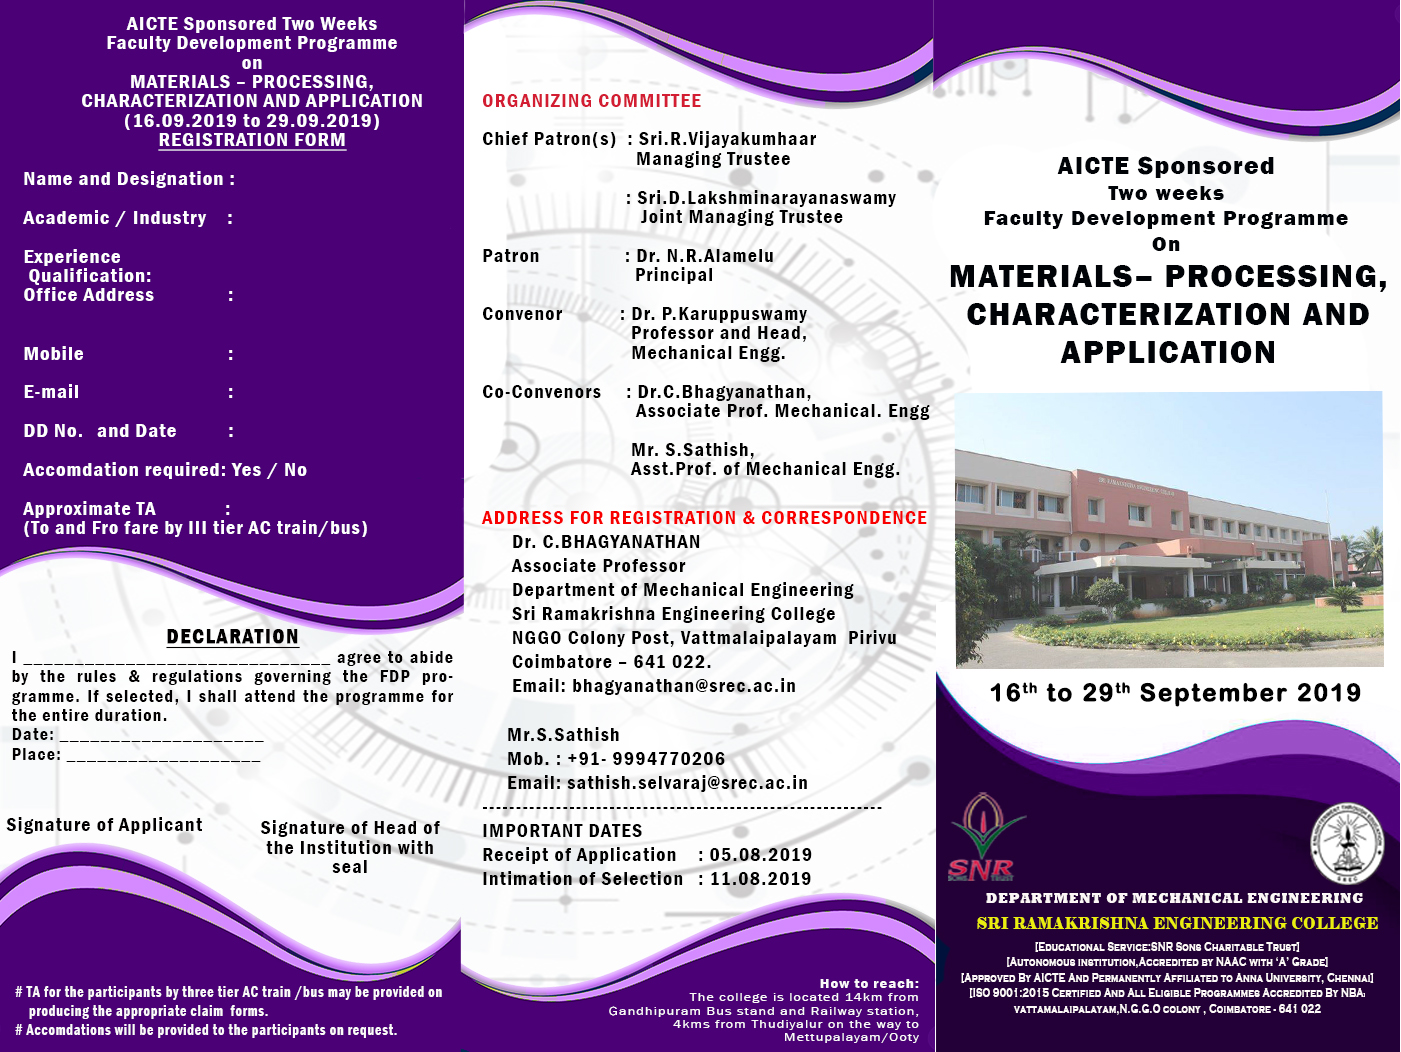 AICTE sponsored Two weeks FDP on Materials-Processing, Characterization and Application 2019